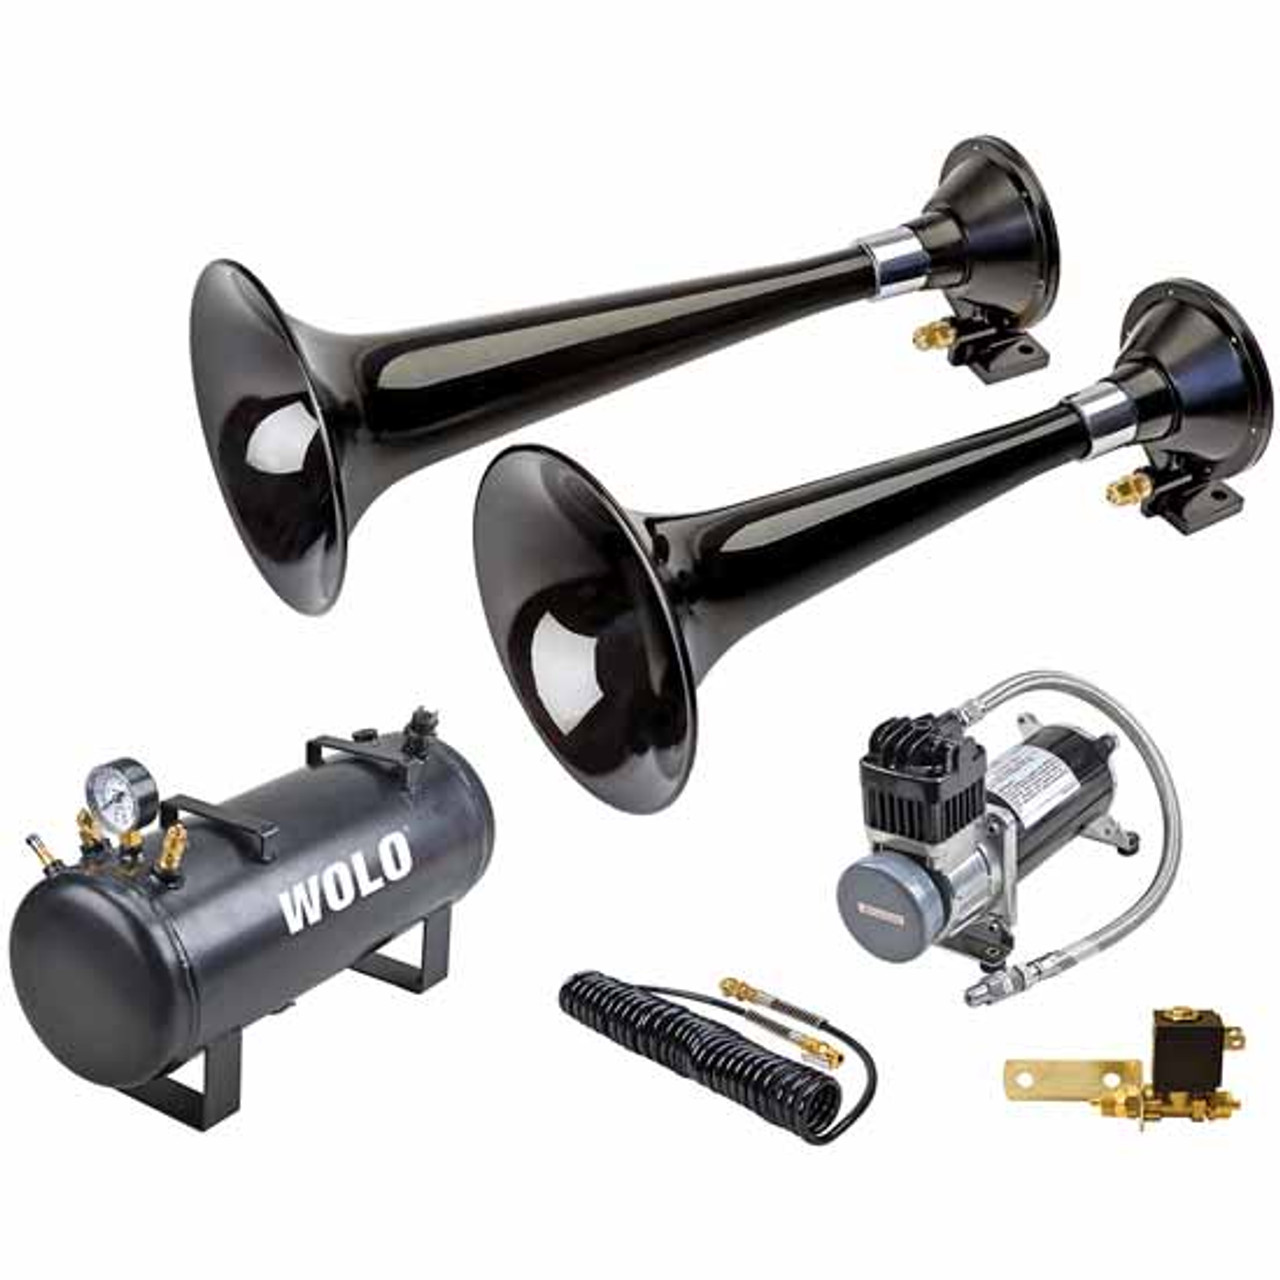 Western Express Pro Train Horn 12-Volt 125 Db 330/336 Hz Kit With  Compressor And Air Tank - 4 State Trucks